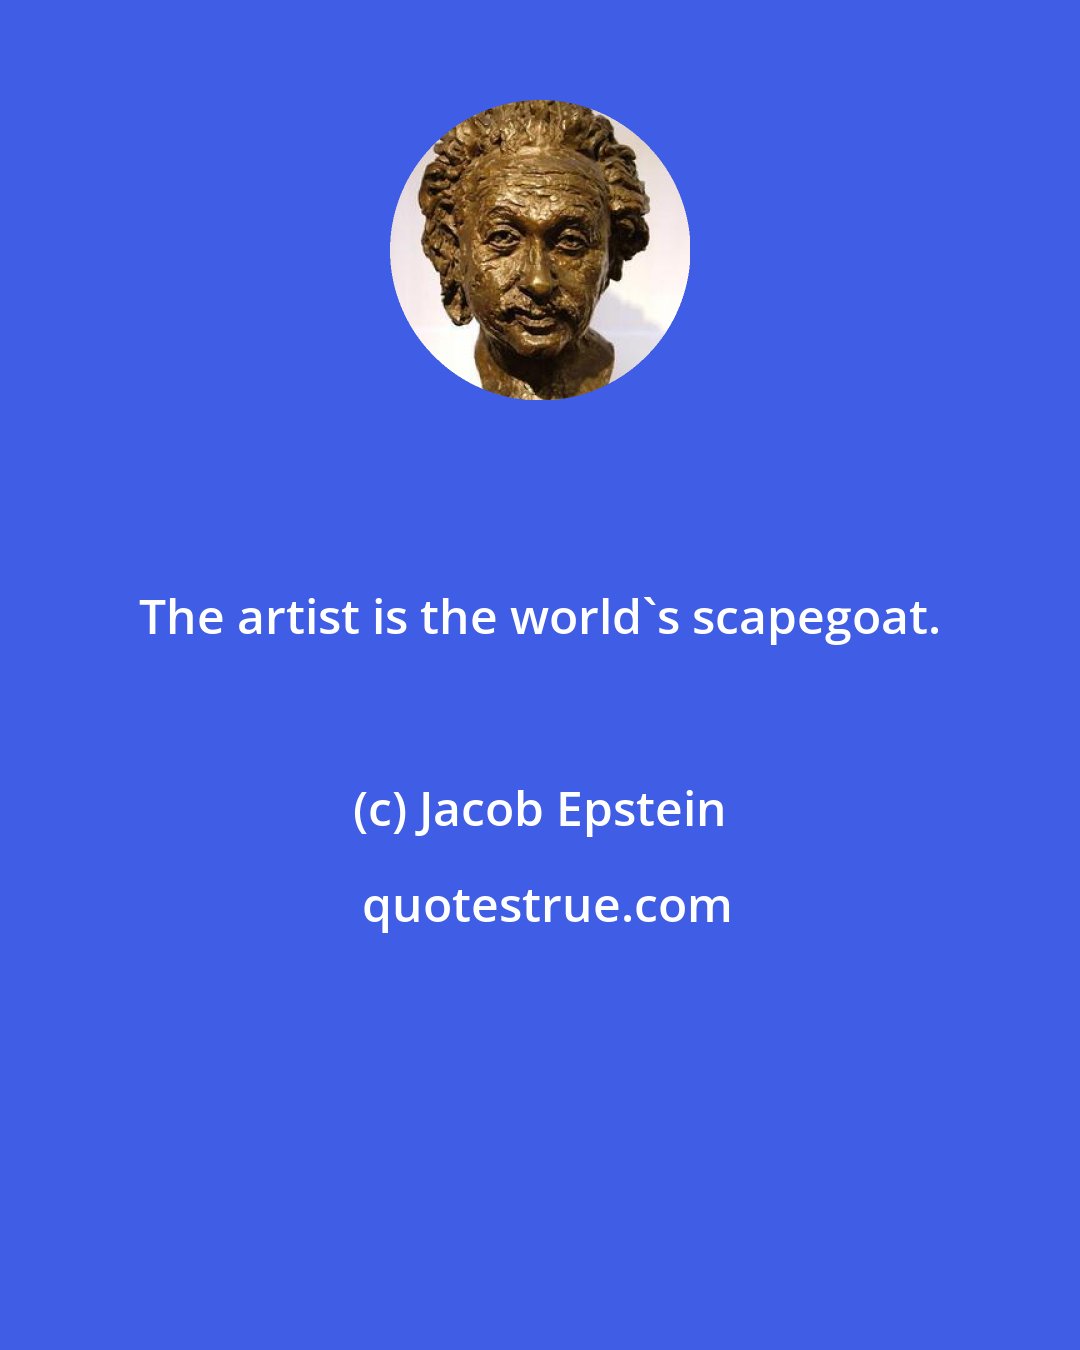 Jacob Epstein: The artist is the world's scapegoat.